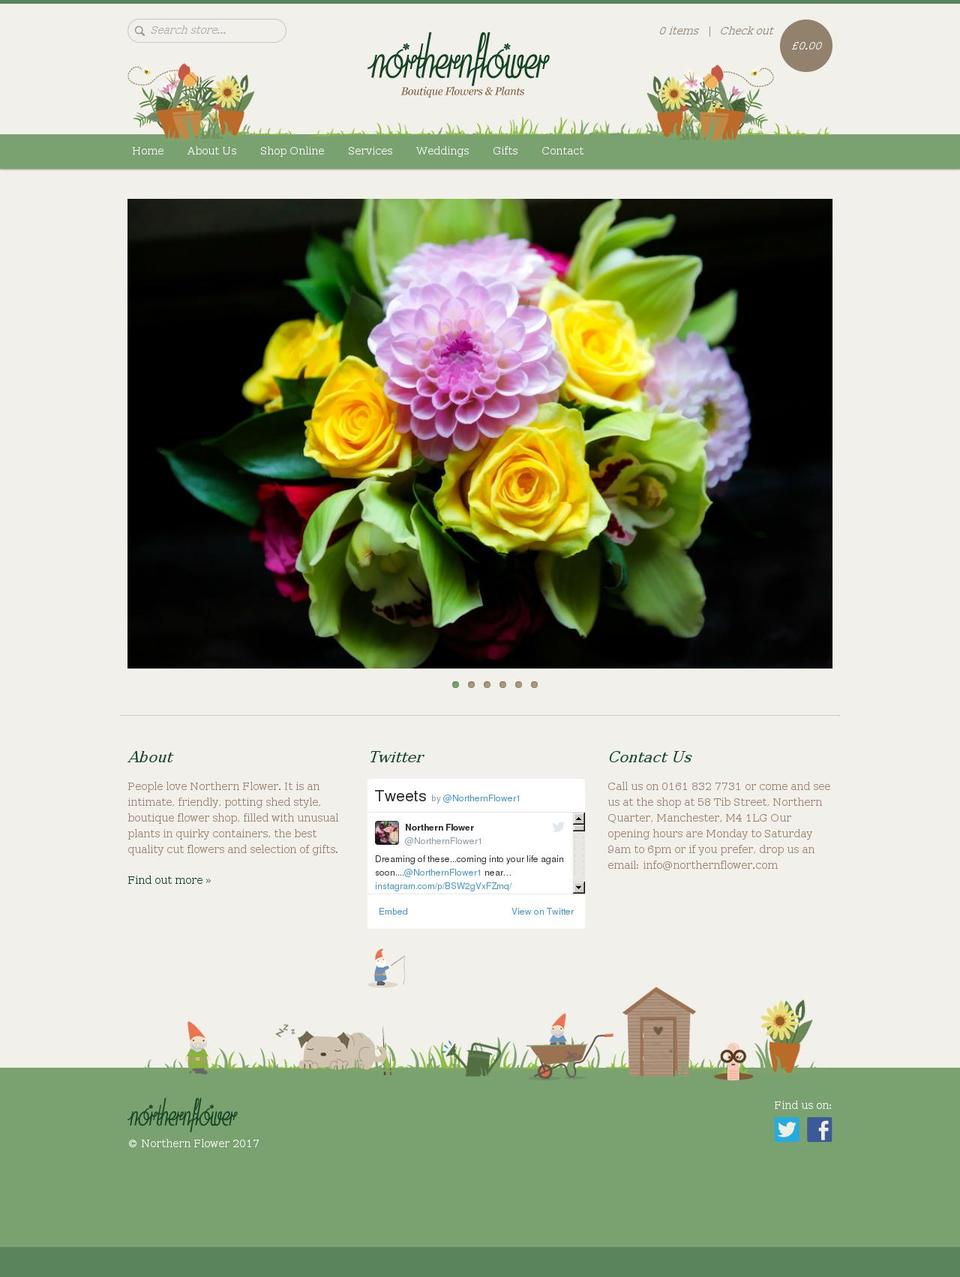 North Shopify theme site example northernflower.com